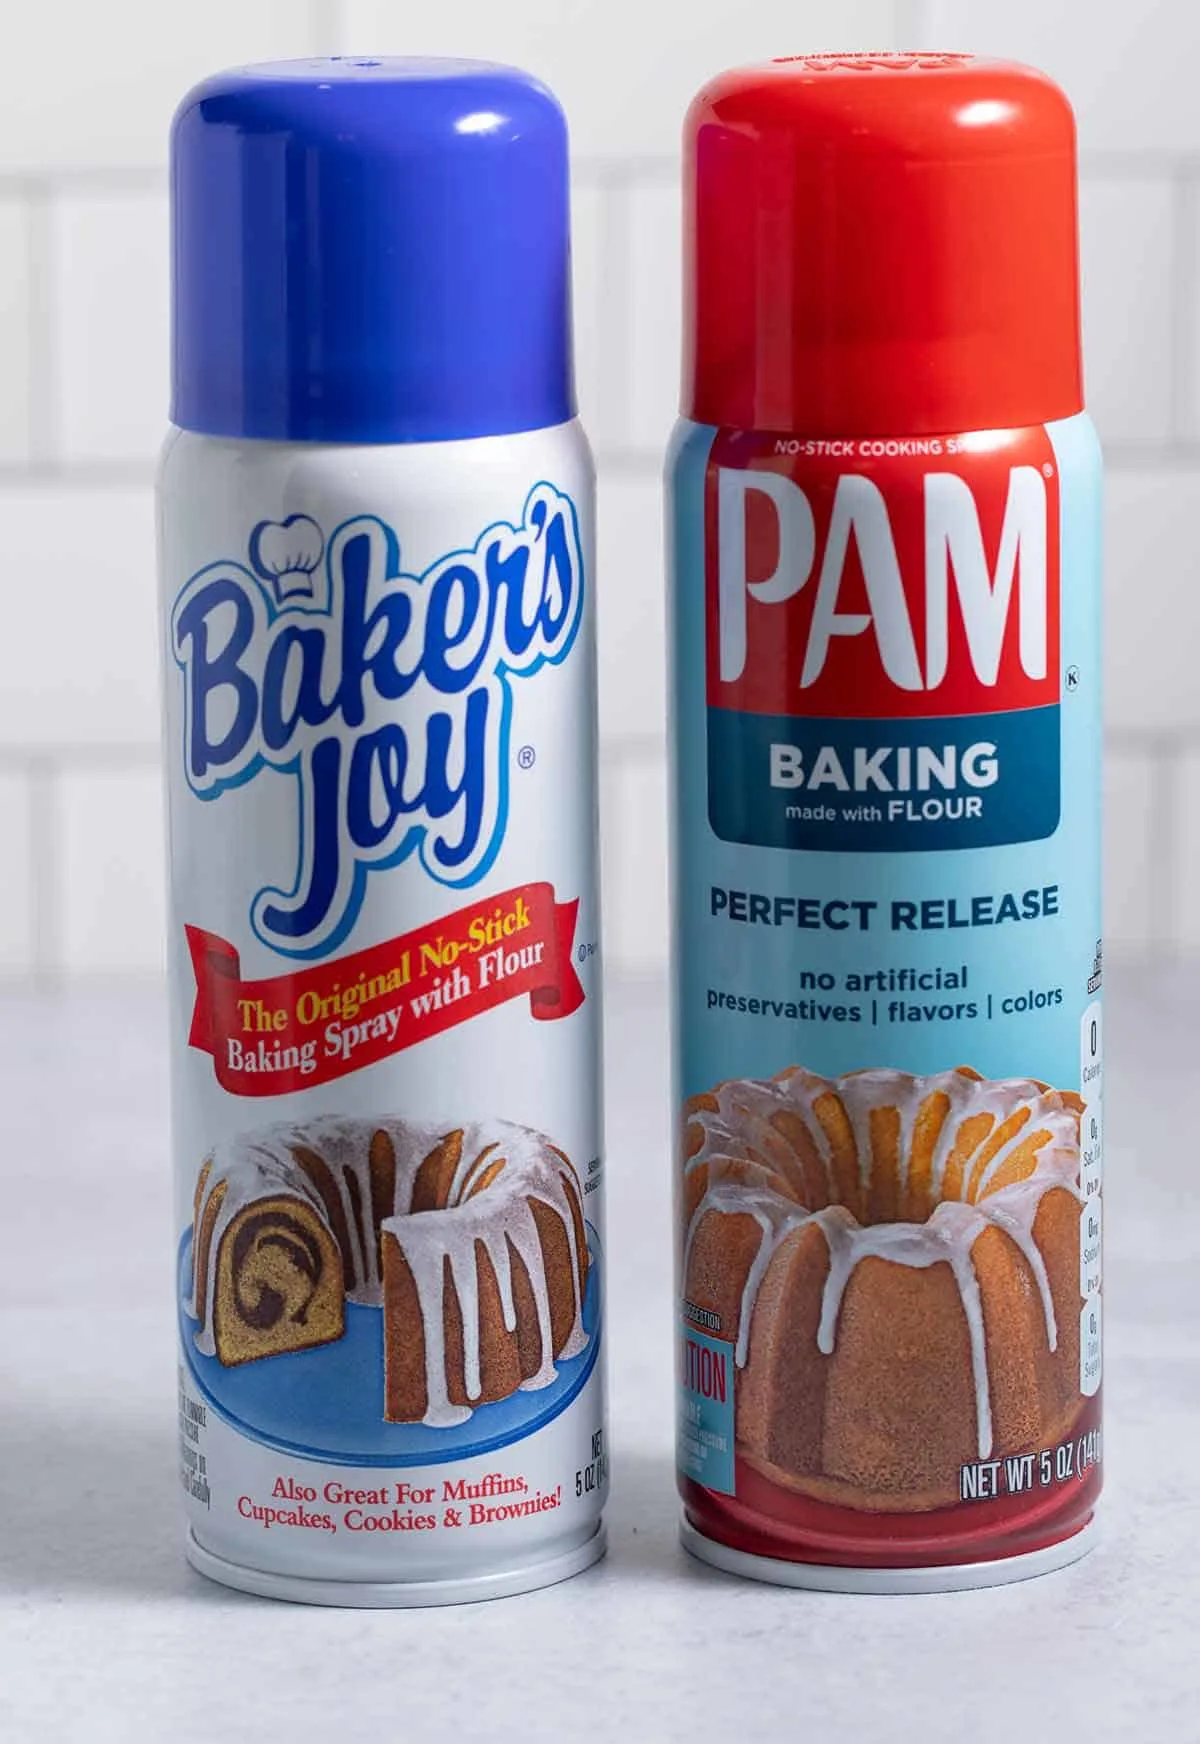 A container of Baker's Joy baking spray next to a bottle of Pam Baking spray made with flour.